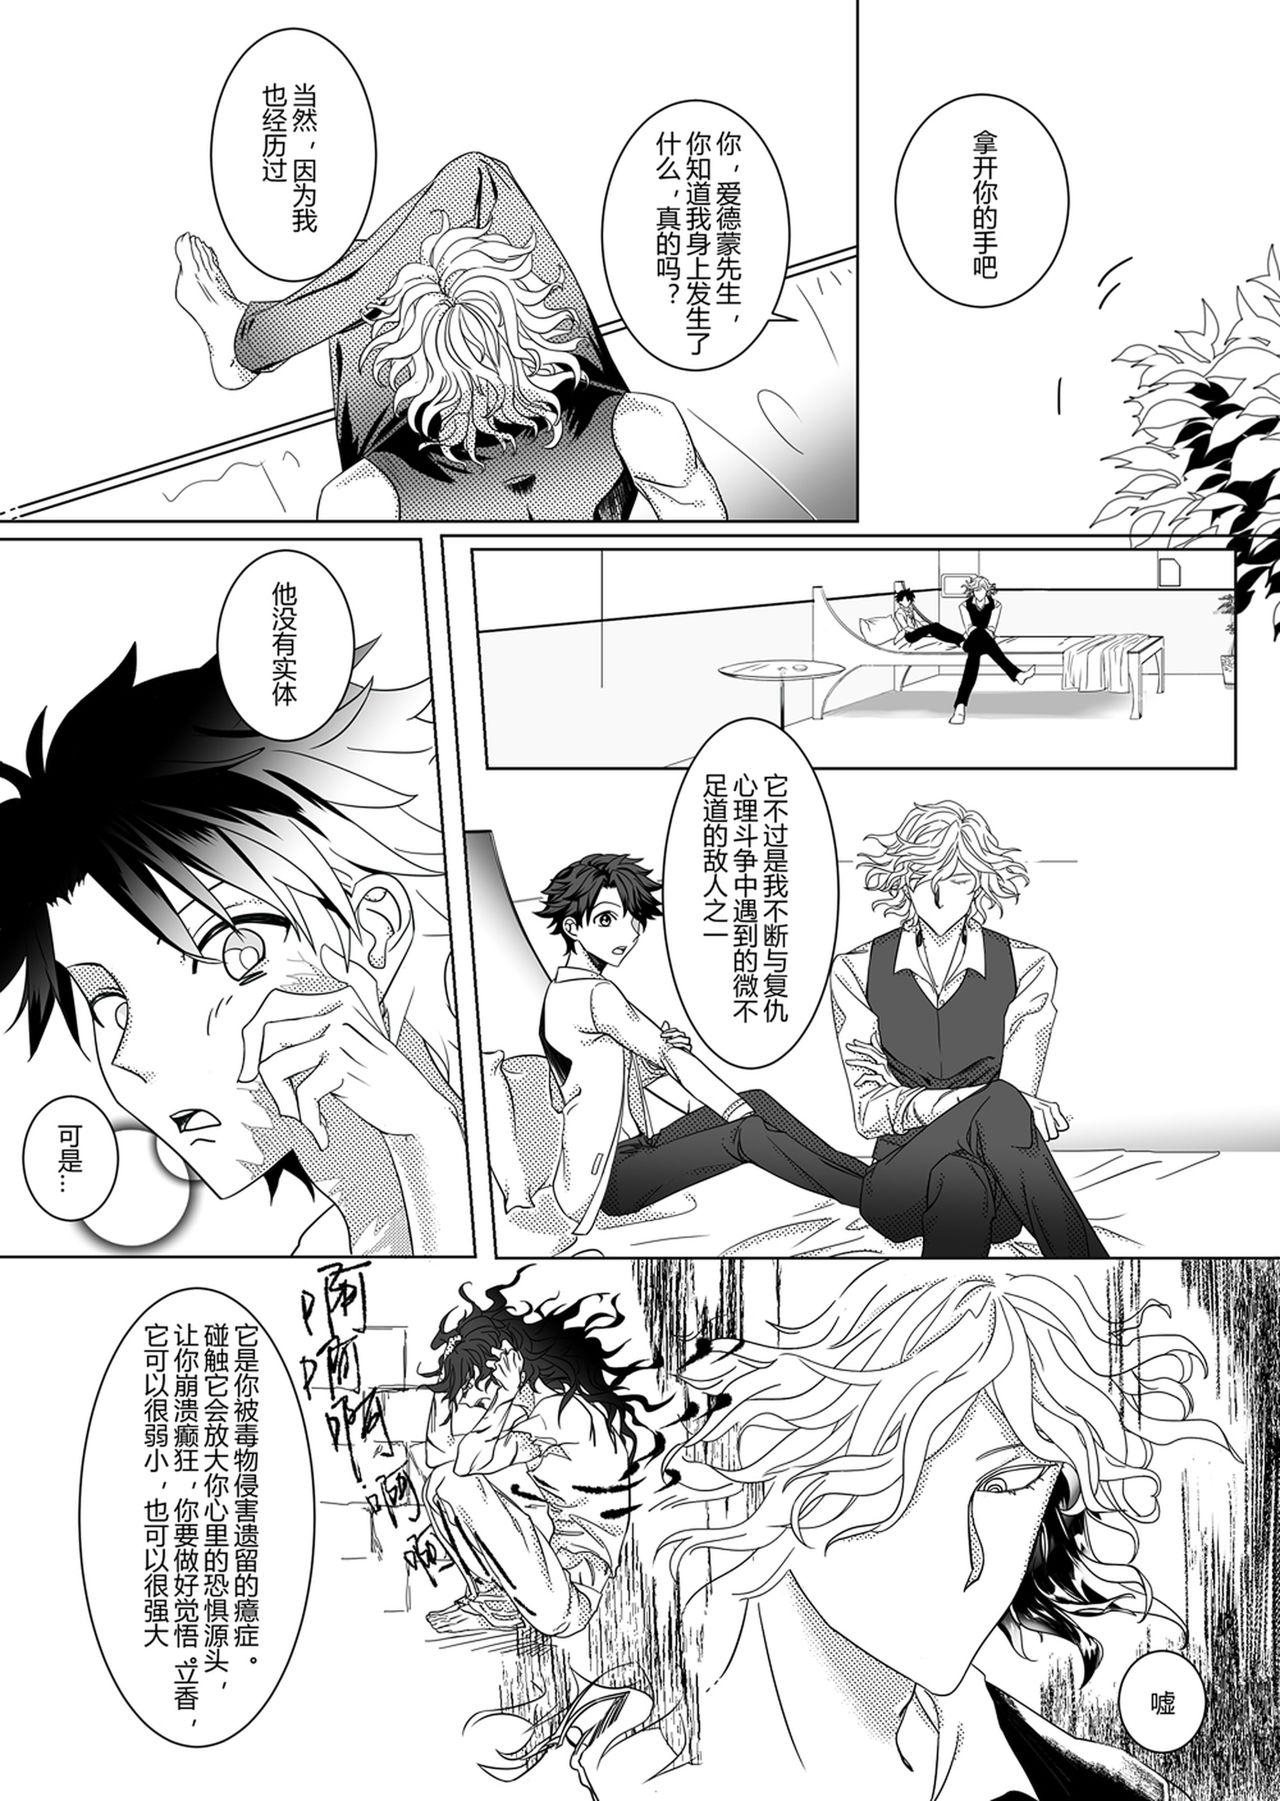 Office Fuck Tobacco Addiction - Fate grand order 18yearsold - Page 10